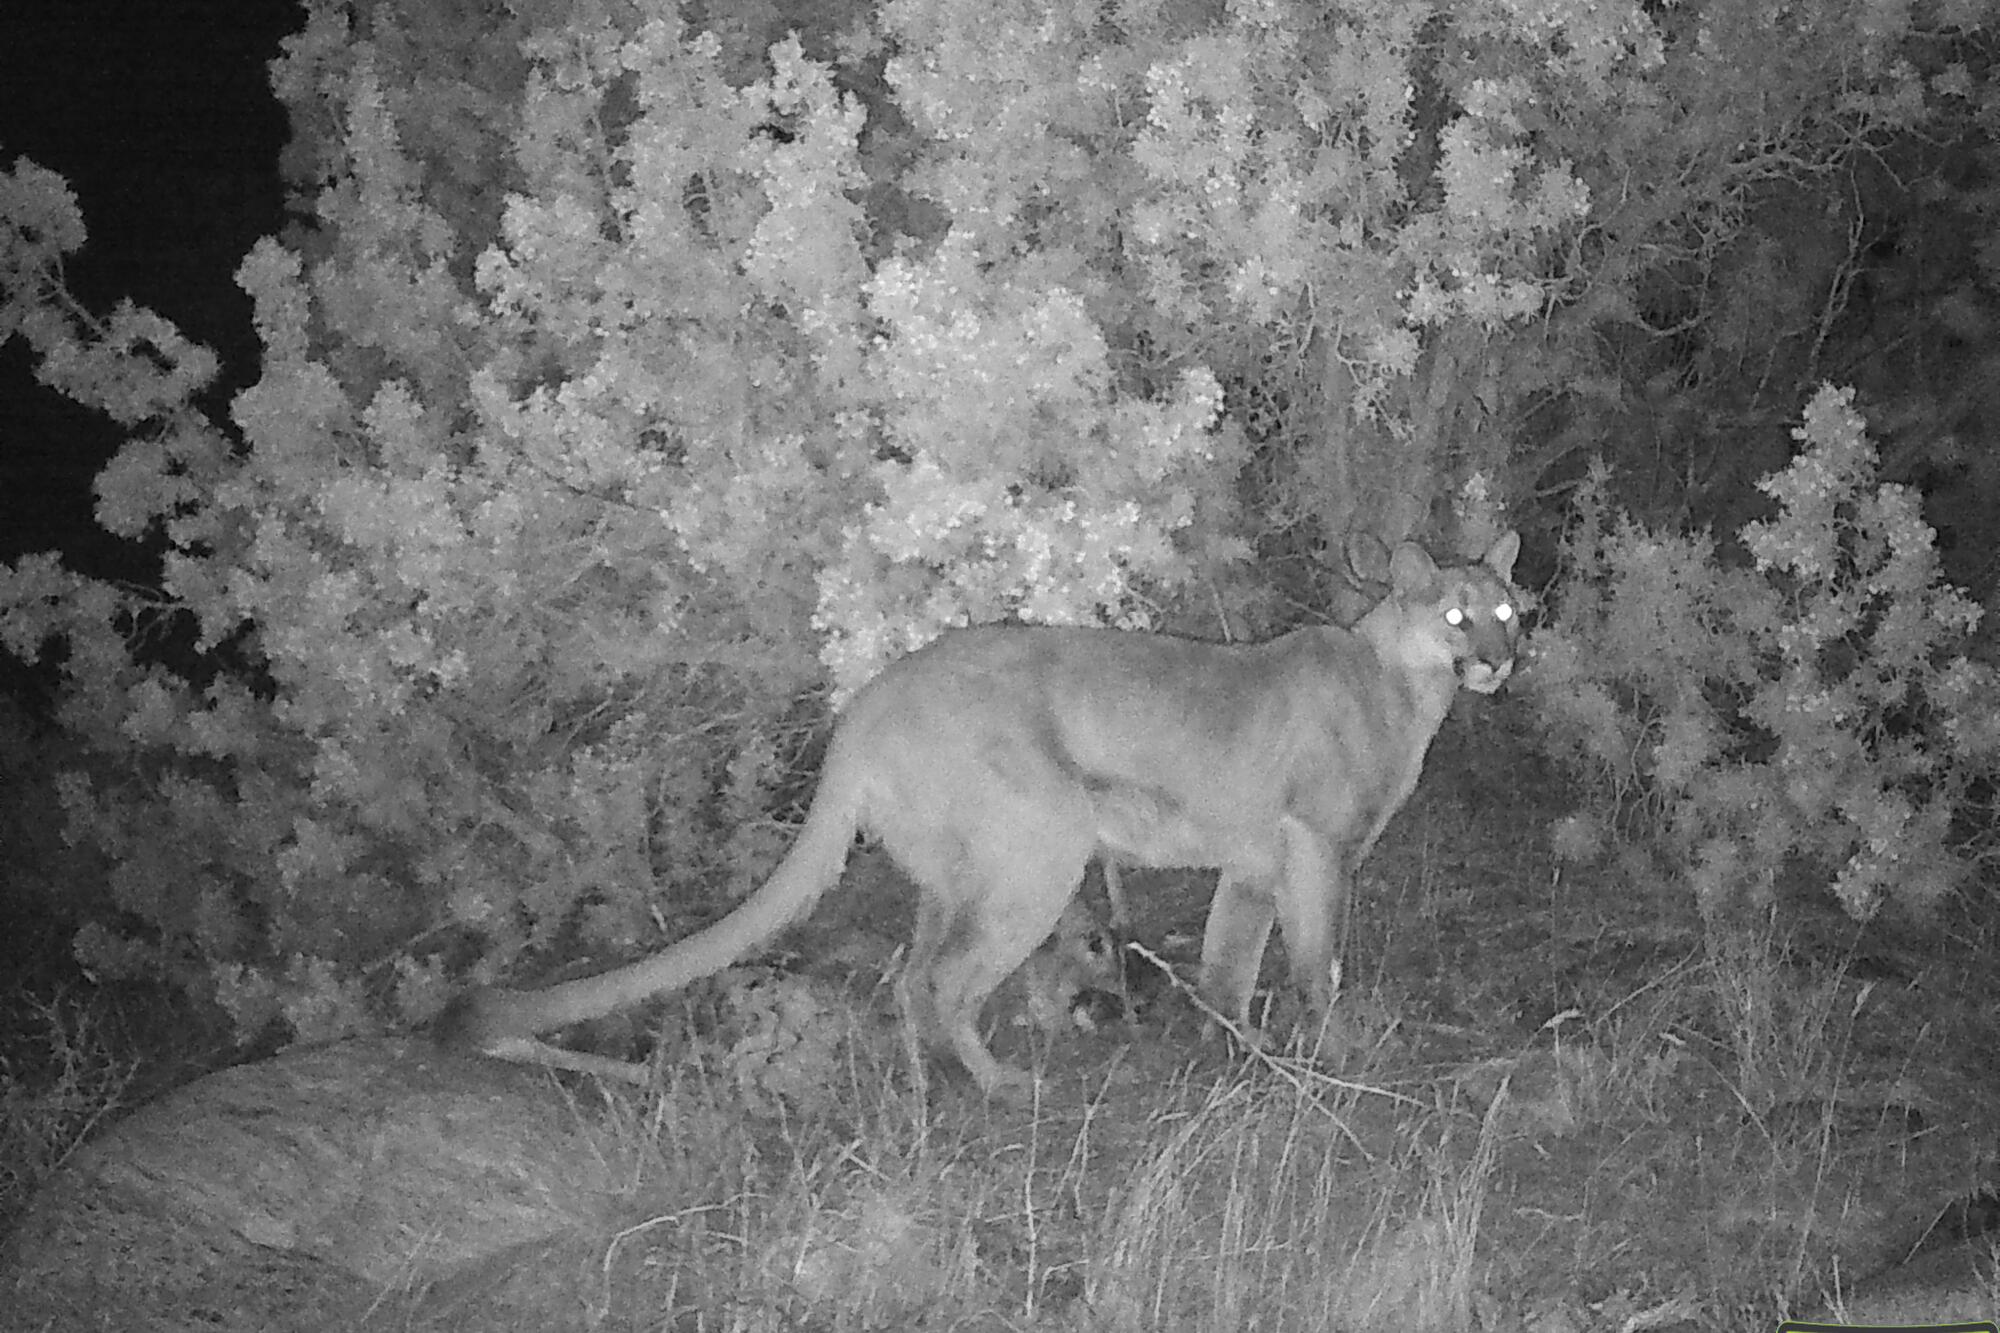 A mountain lion in Joshua Tree National Park, captured by a night vision camera in black and white